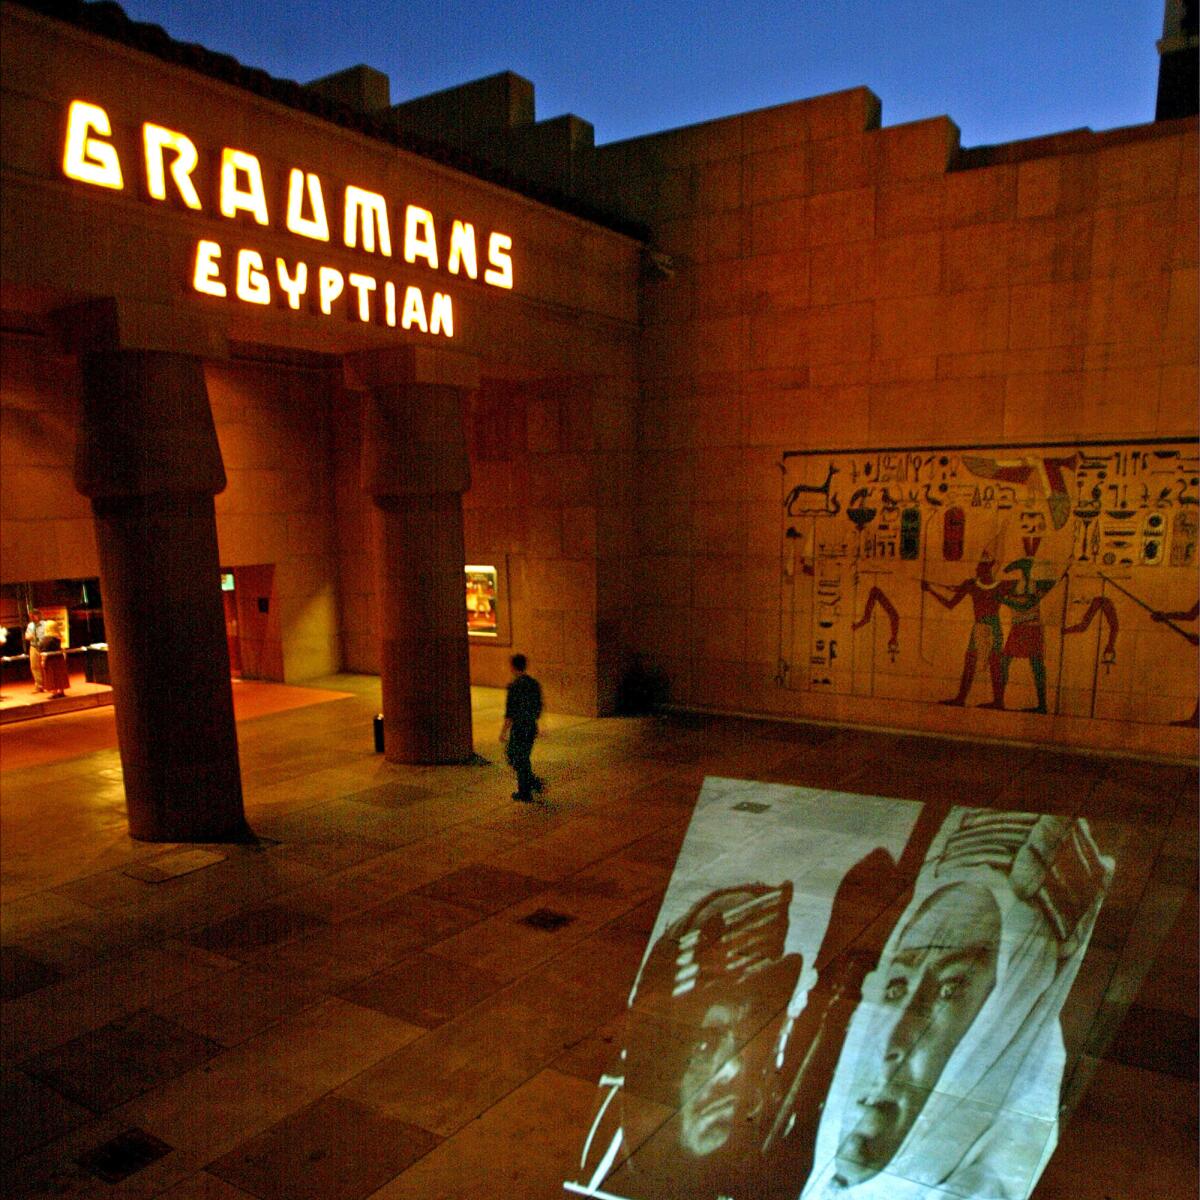 Sid Grauman opened the Egyptian Theatre in 1922 at a time when an Egyptian craze was sweeping the nation following the discovery of King Tutankhamen'?s tomb.